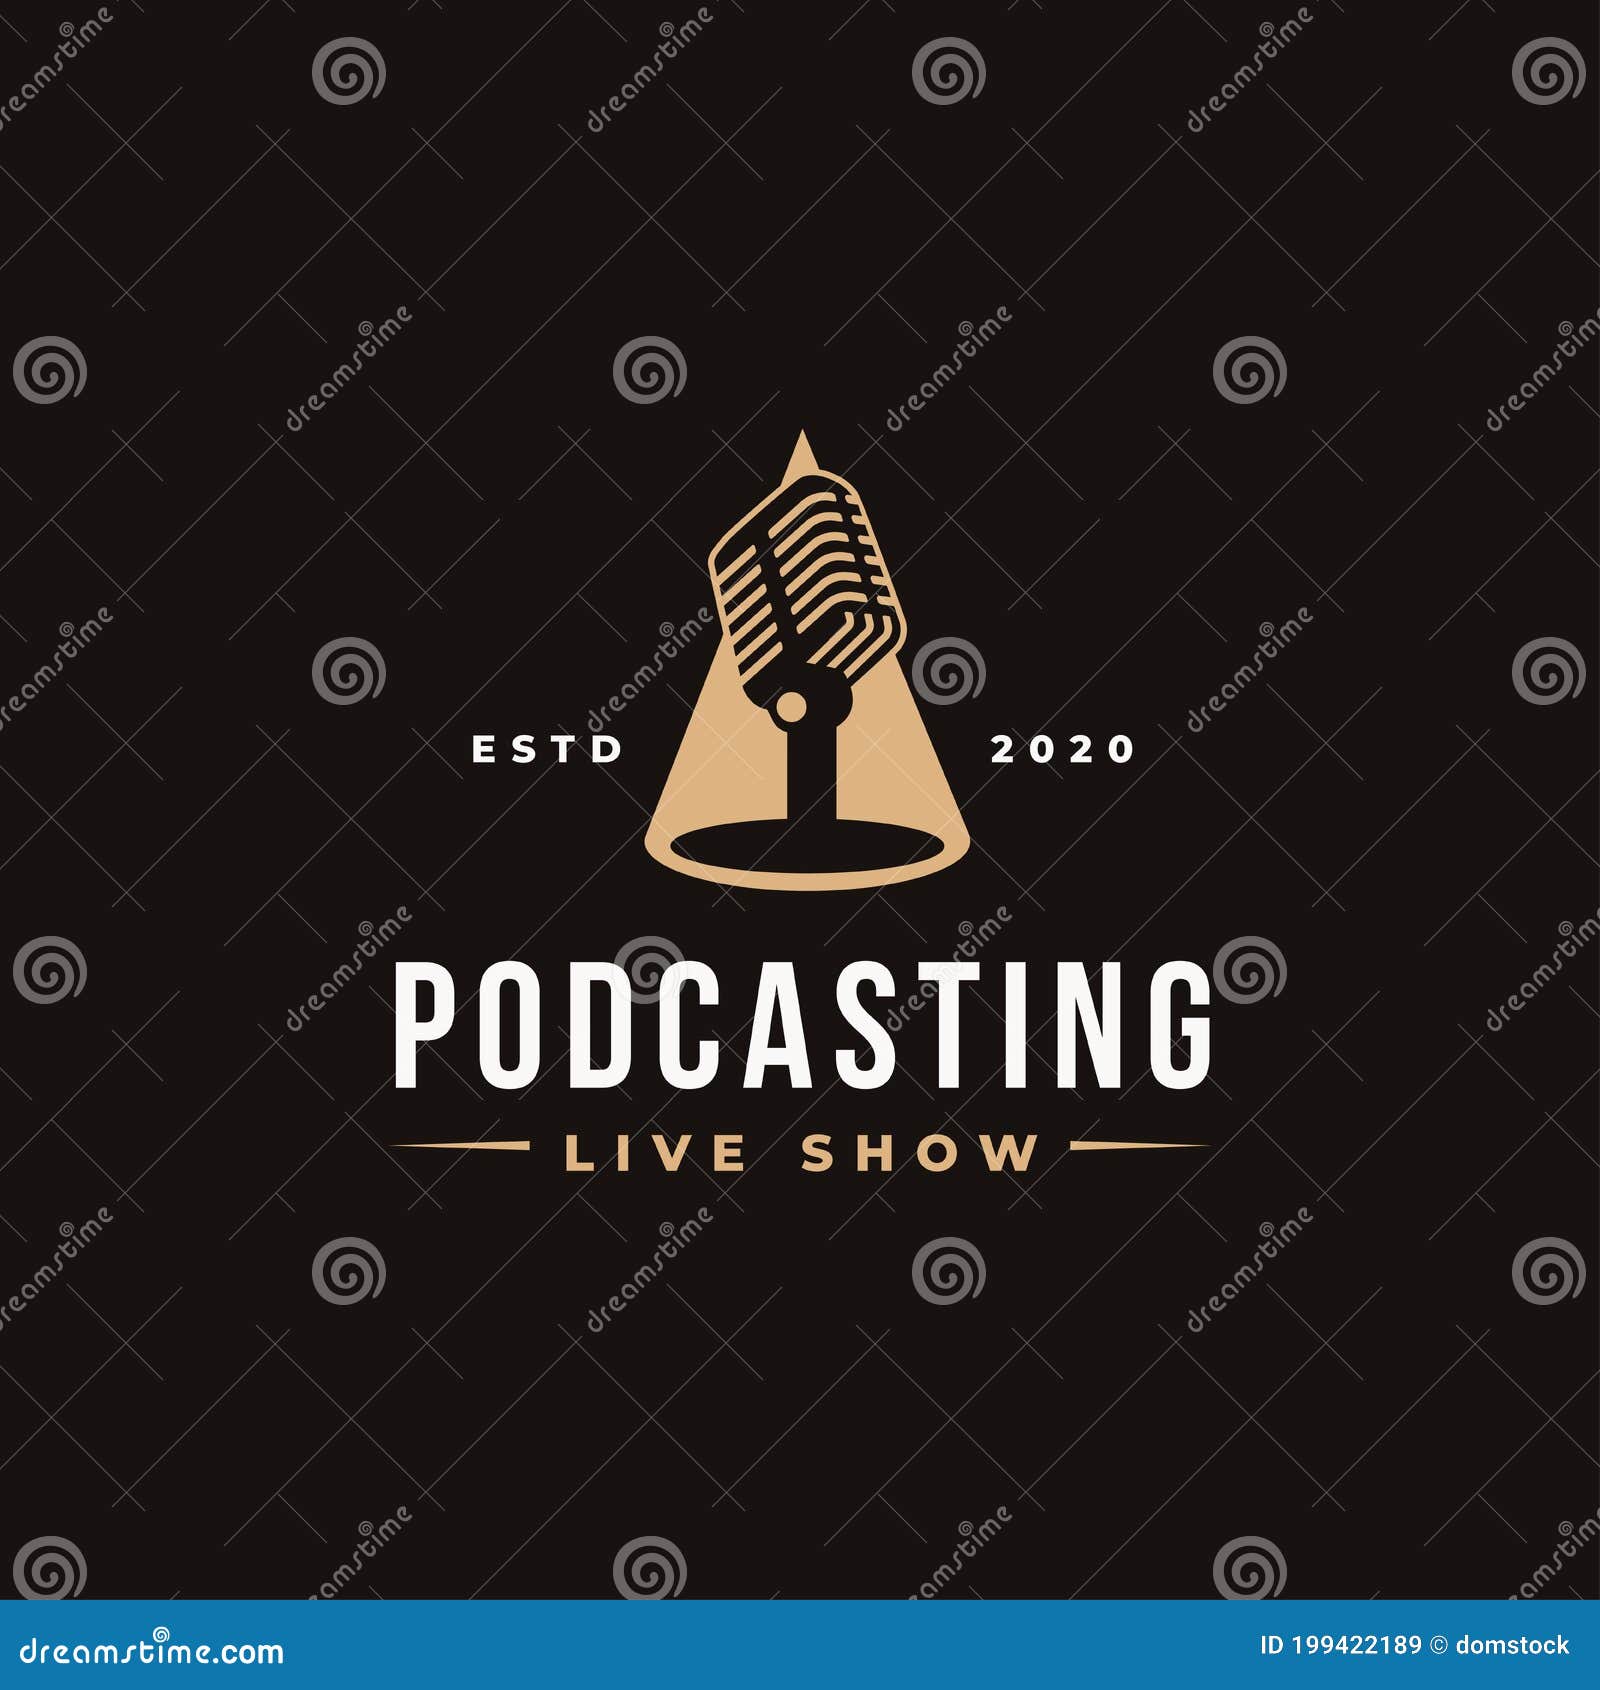 stand microphone on spotlight logo, podcasting logo icon  template